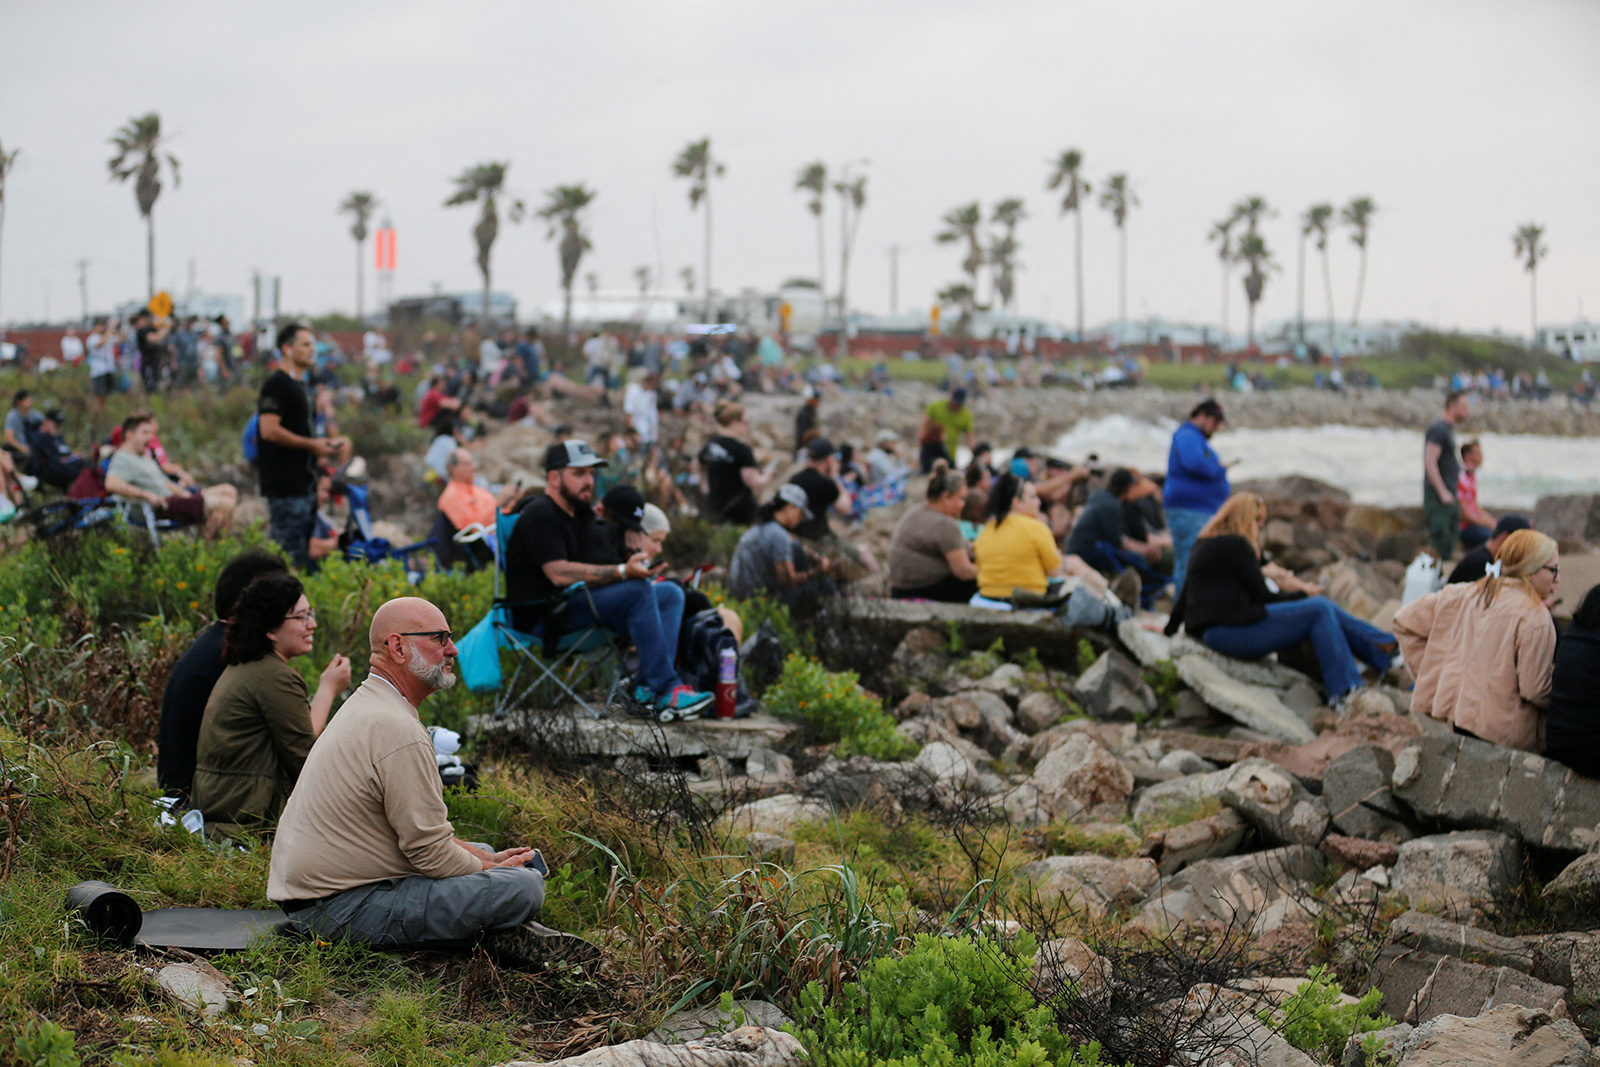 People wait before SpaceX's Starship spacecraft launch in Brownsville, Texas, on Thursday, April 20.